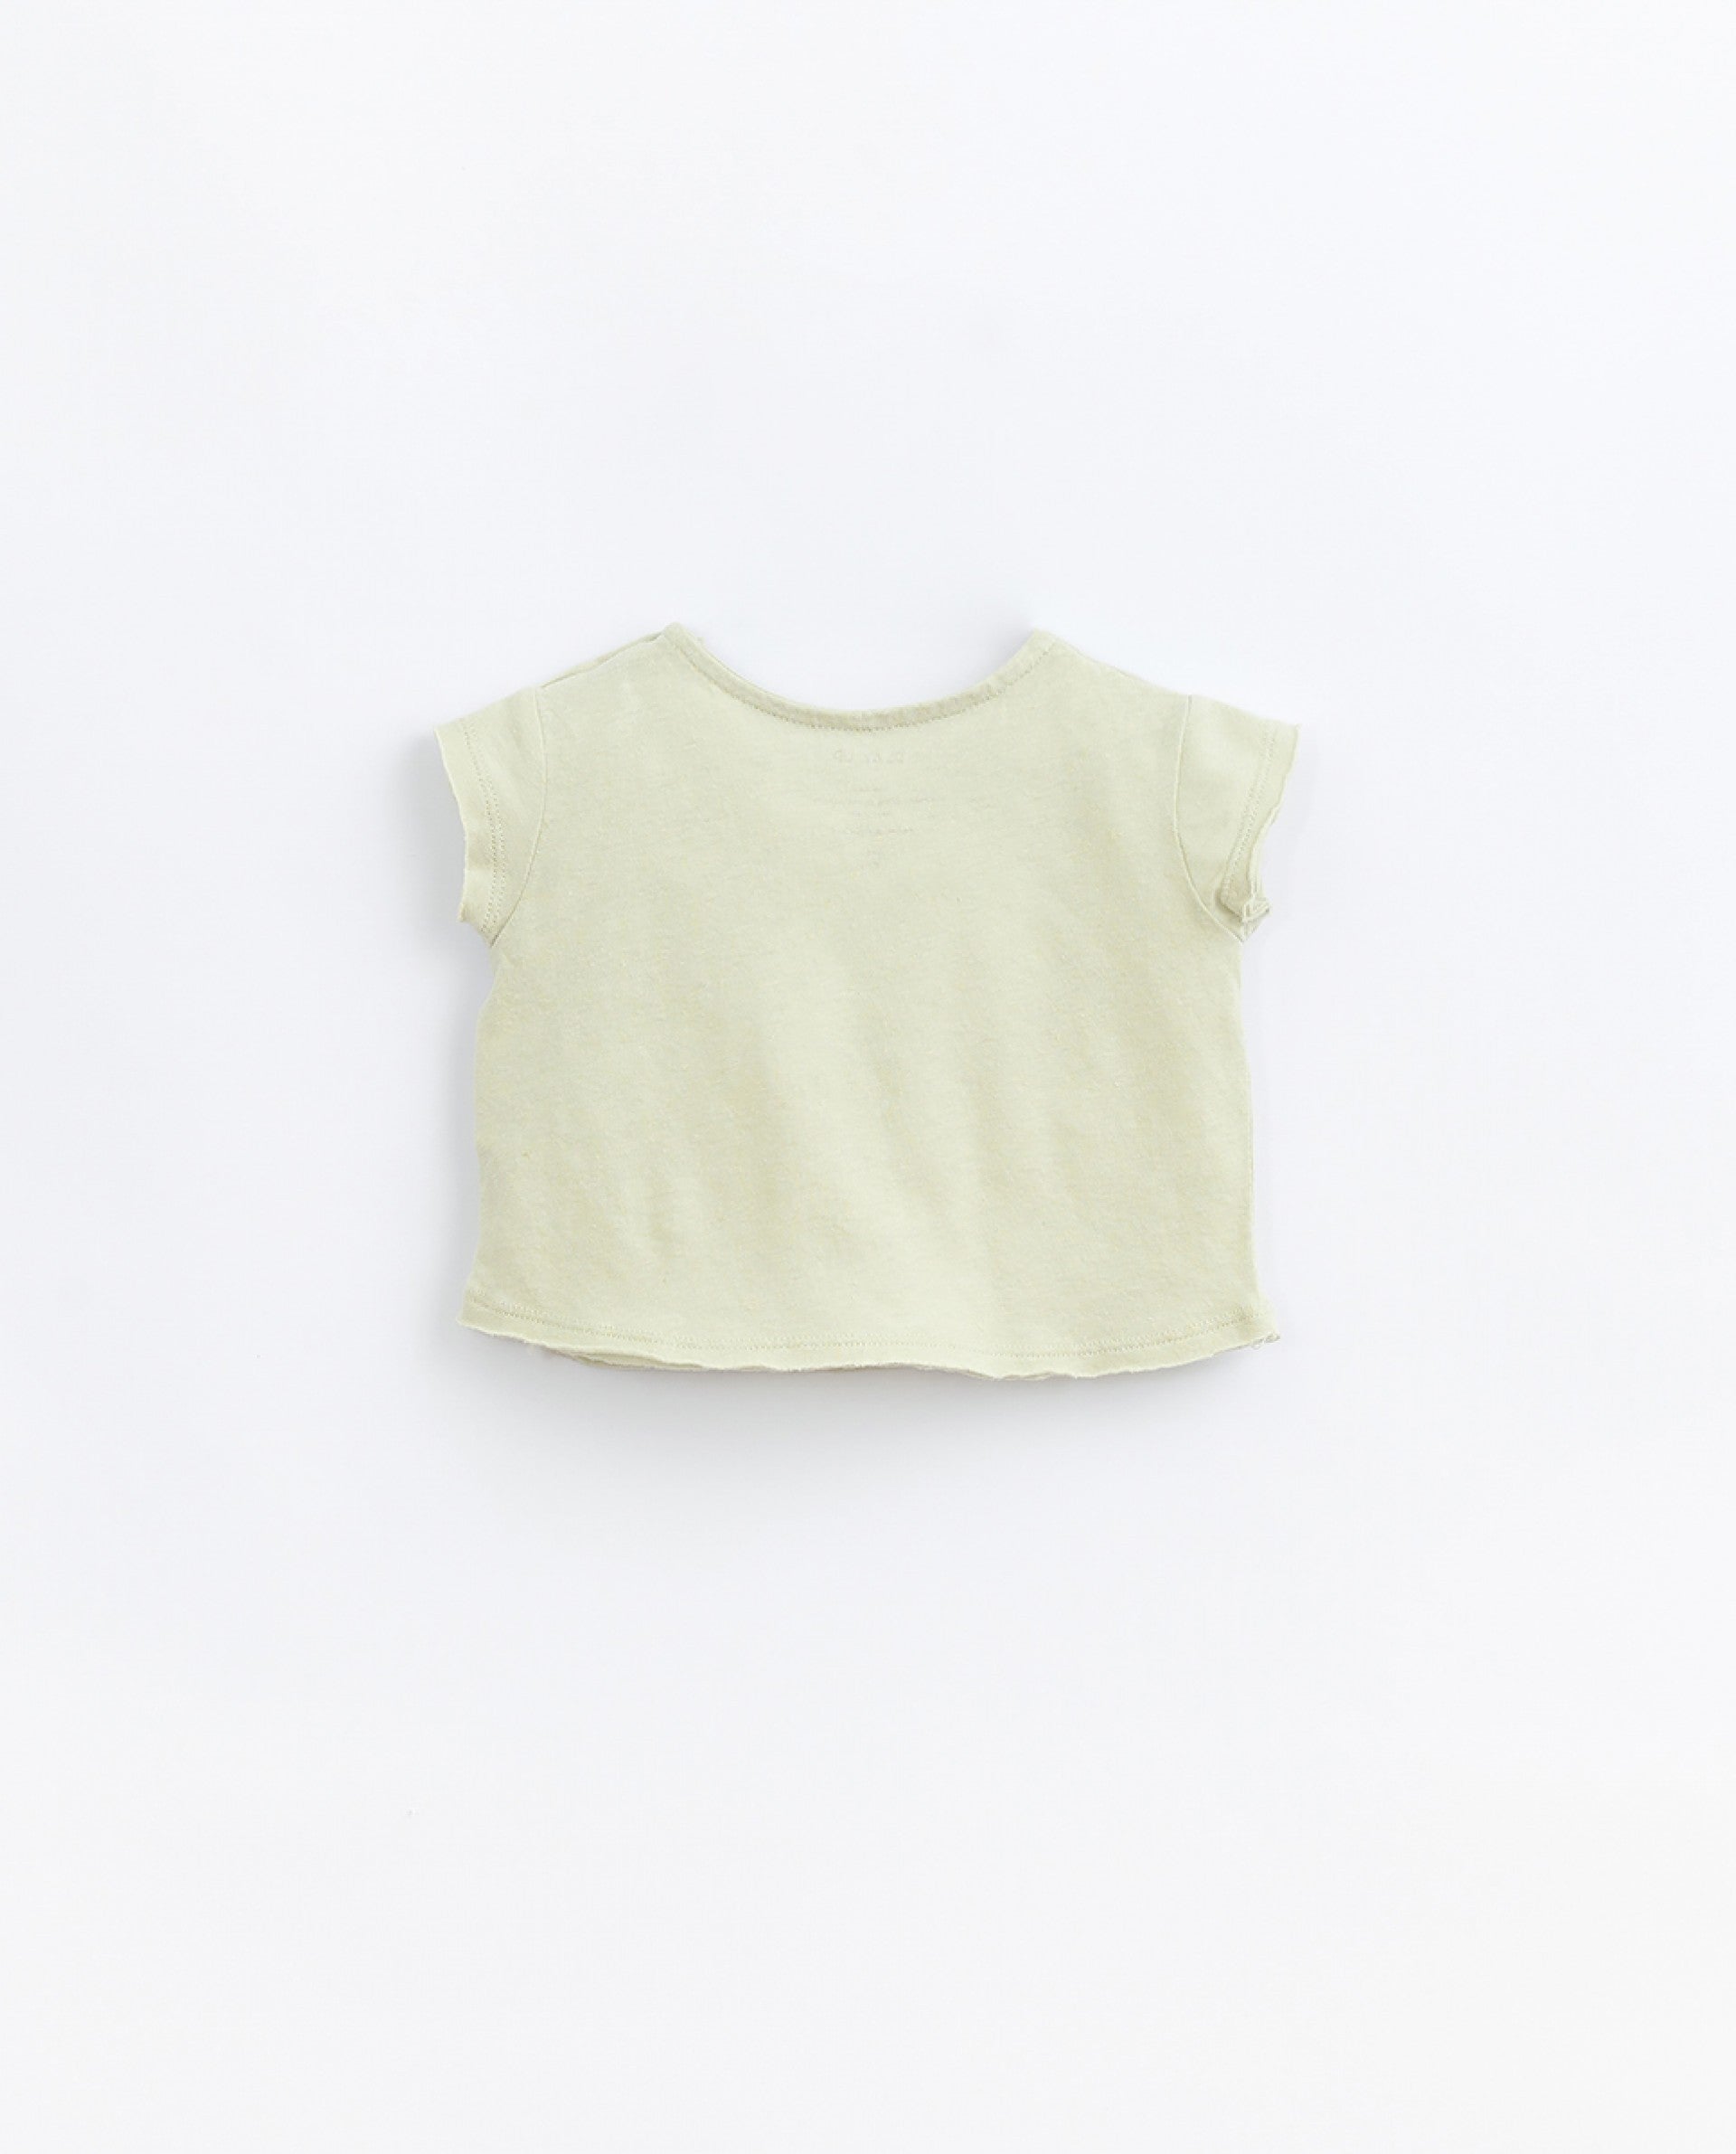 T-shirt with lace detail on the chest